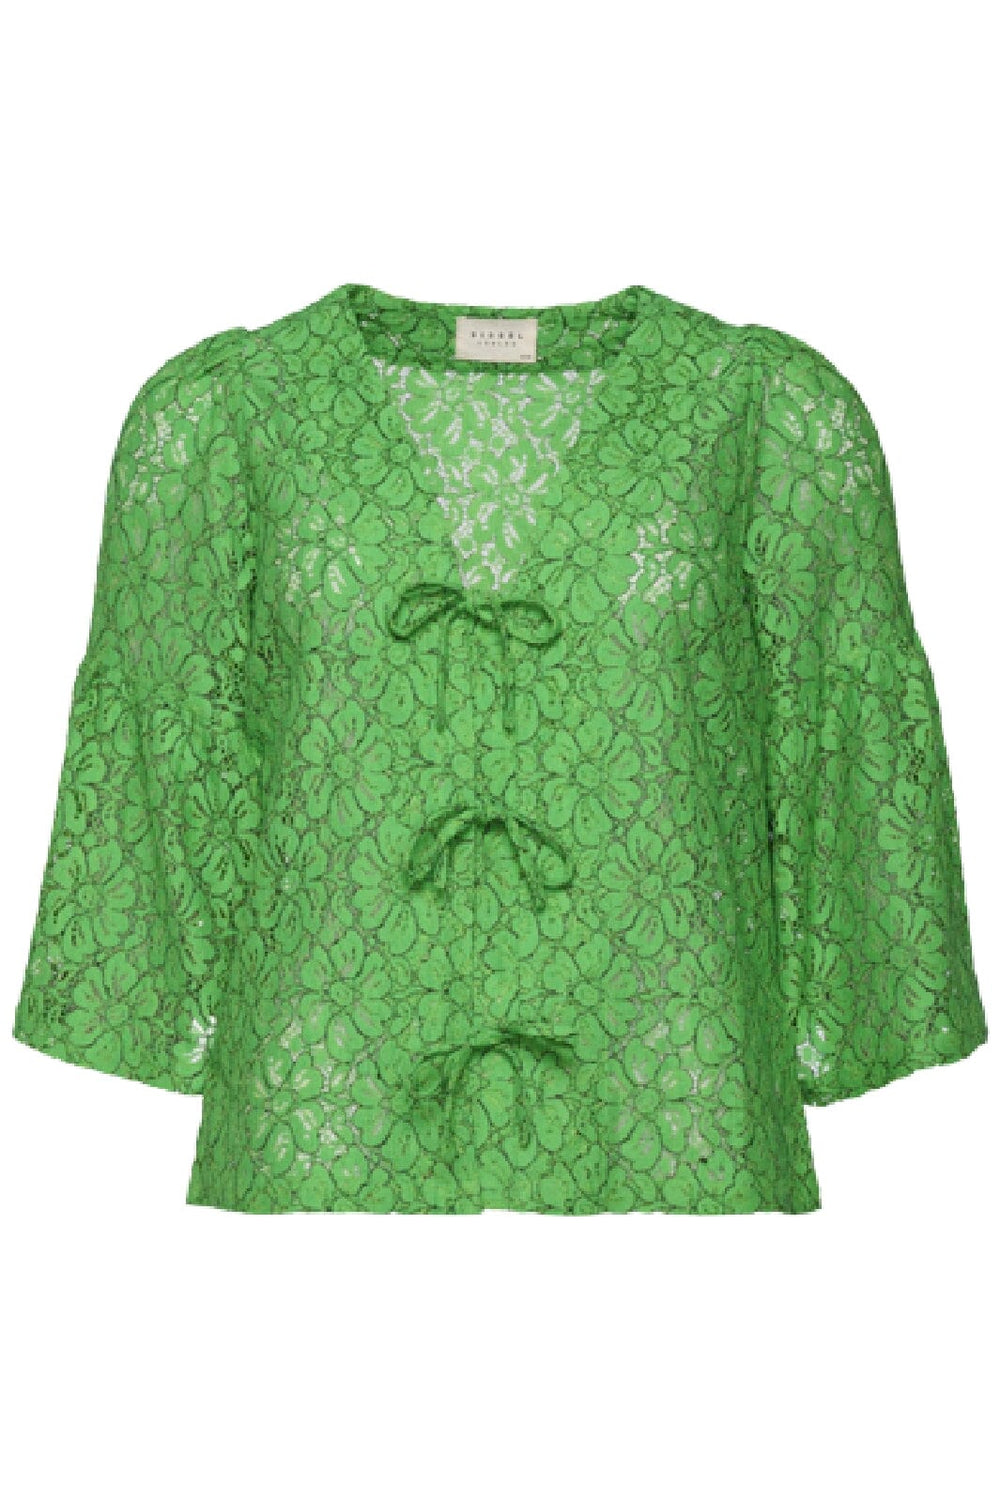 Sissel Edelbo - Lace Leftover Top - Green Toppe 